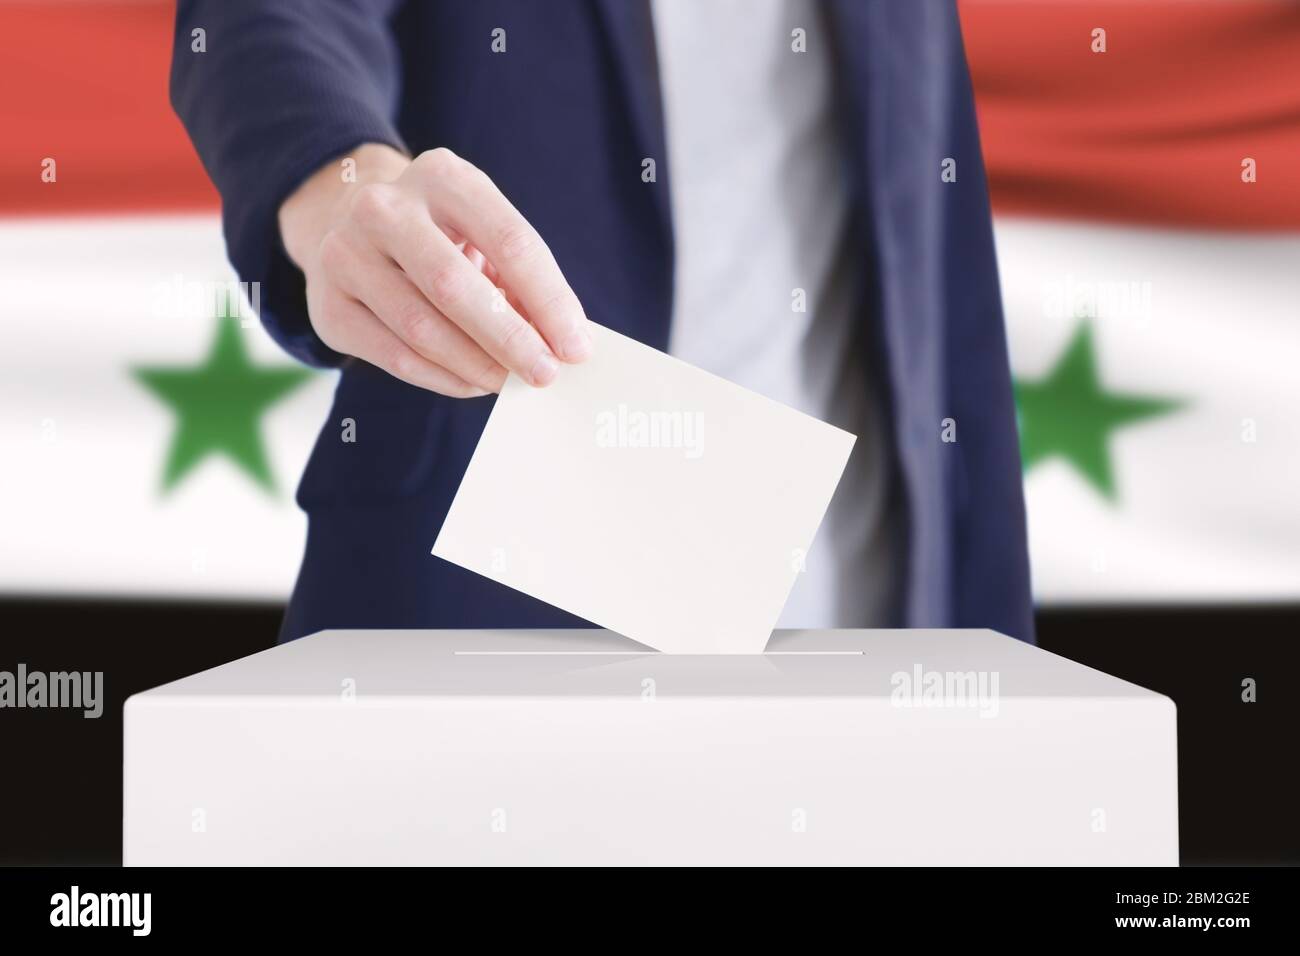 Man putting a ballot into a voting box with Syrian flag on background. Stock Photo